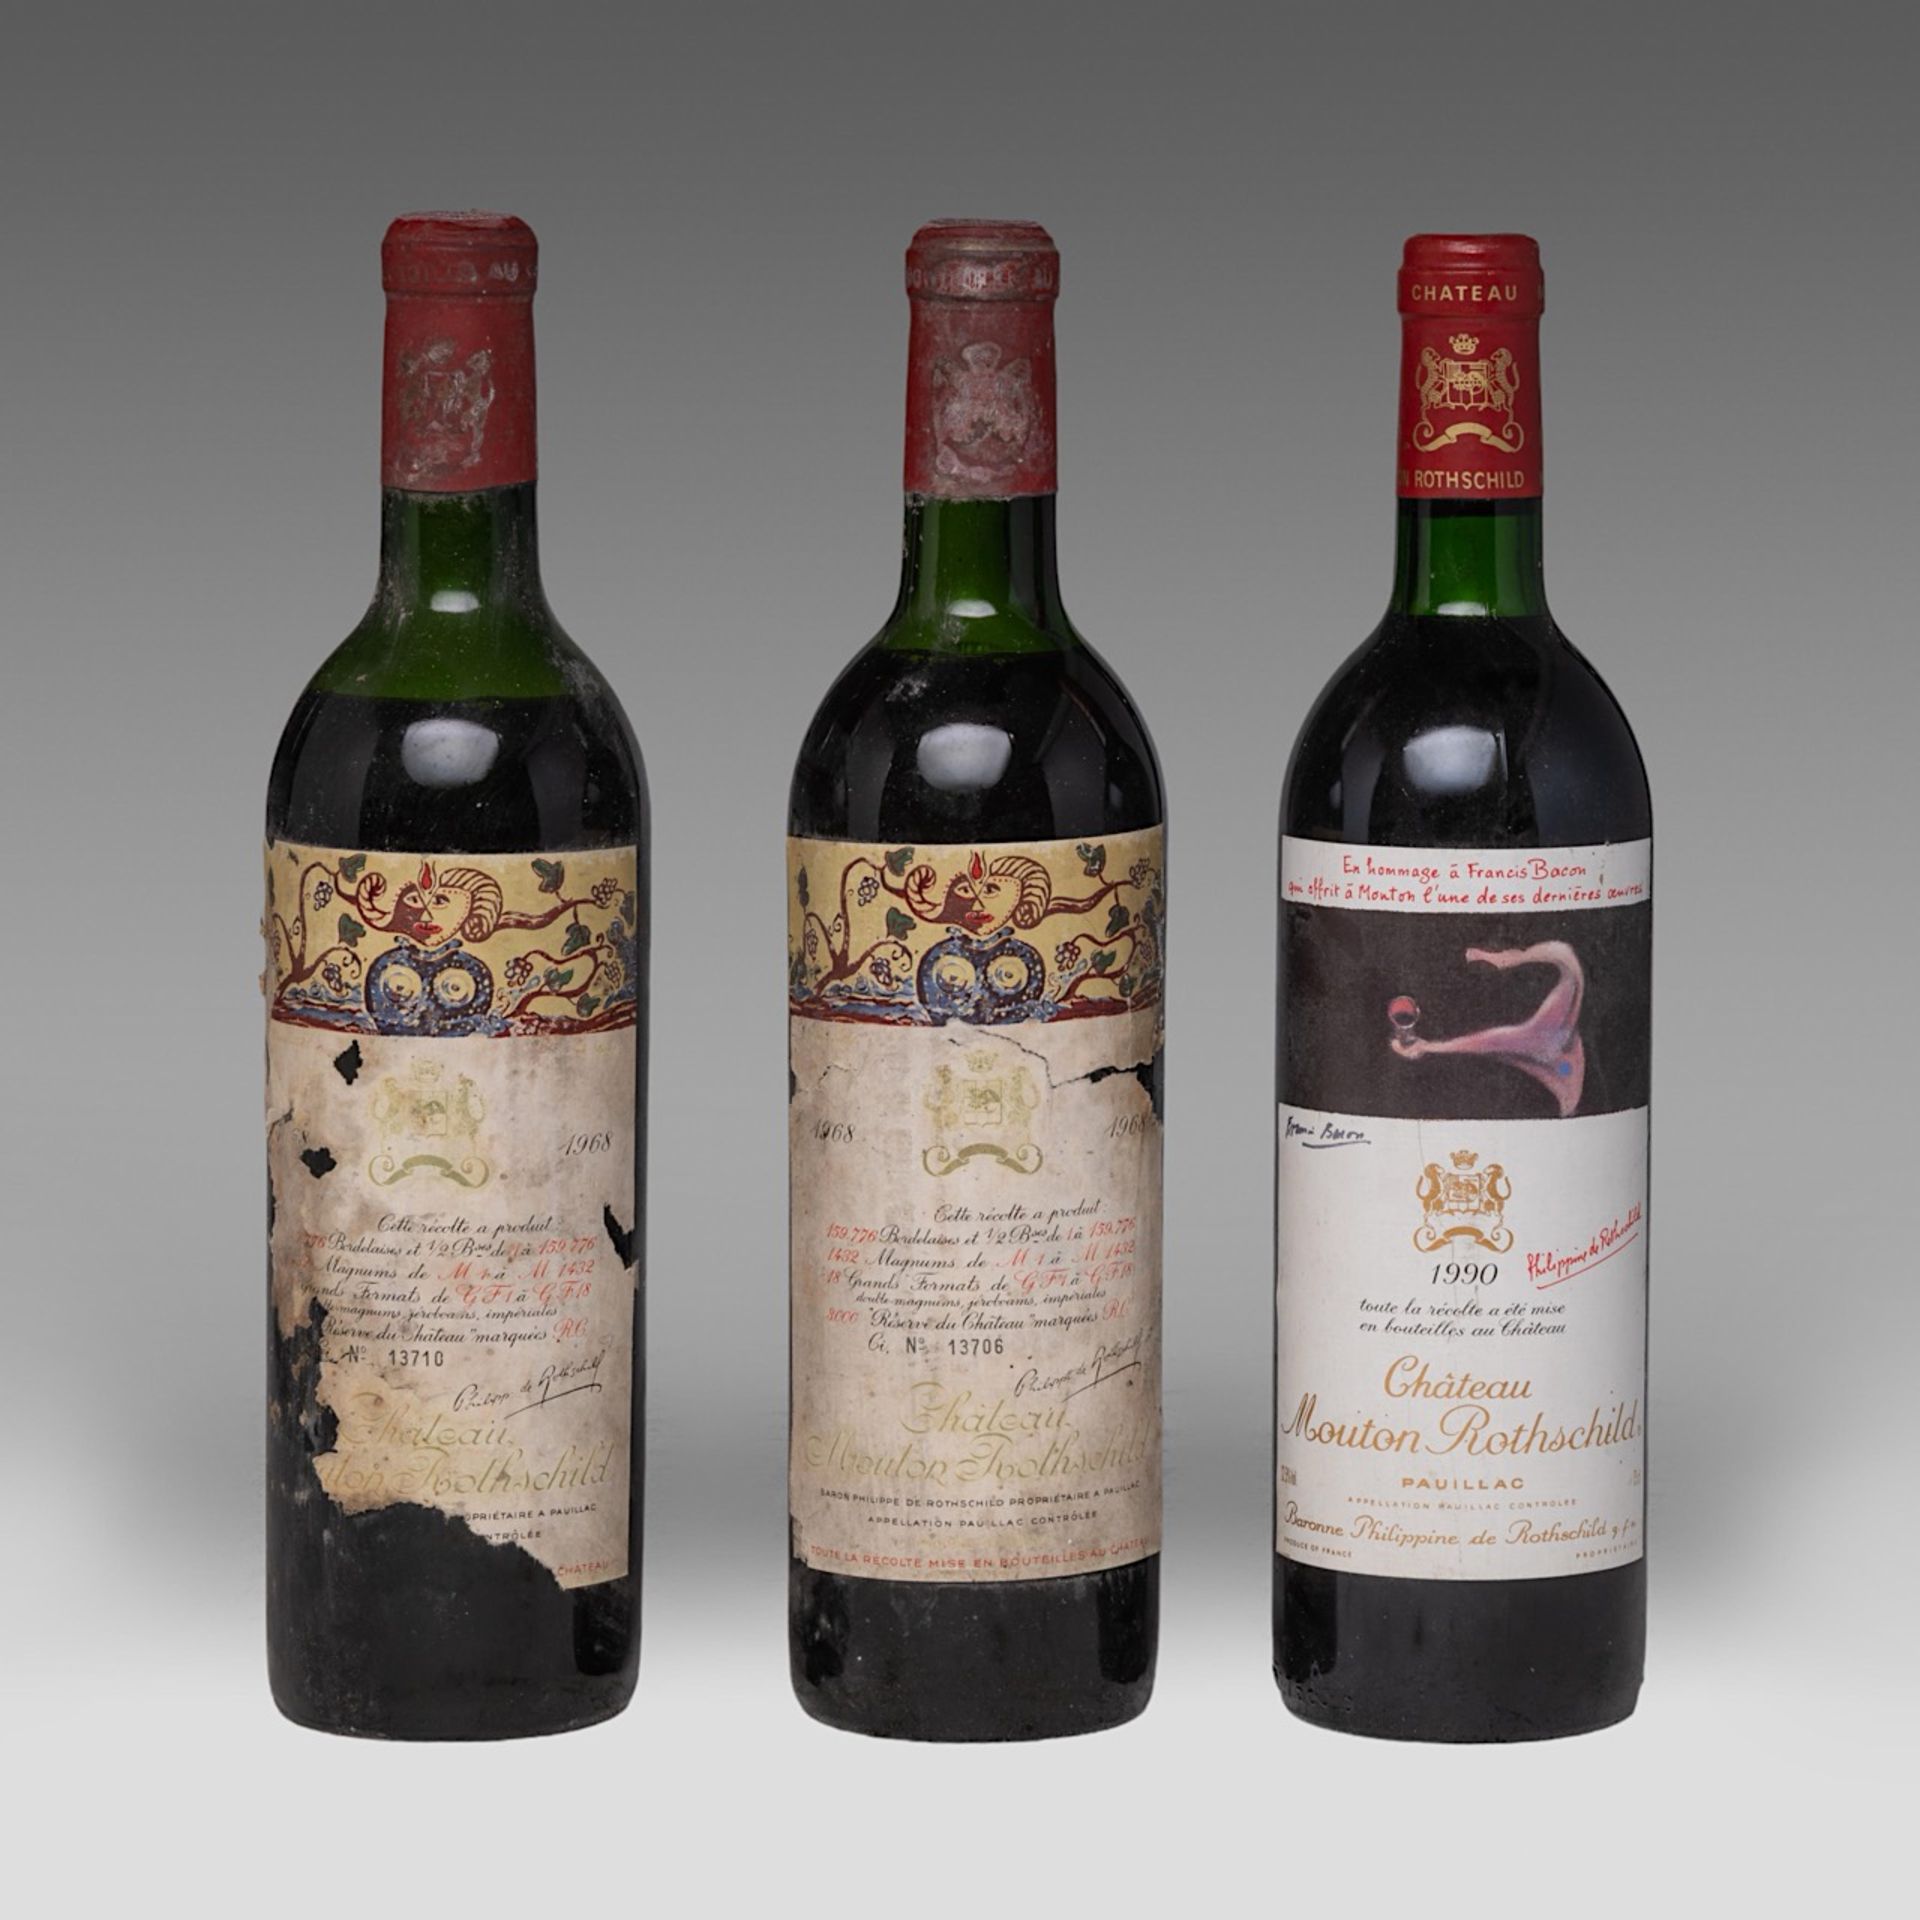 Two bottles 1968 Chateau Mouton Rothschild and a 1990 Chateau Mouton Rothschild